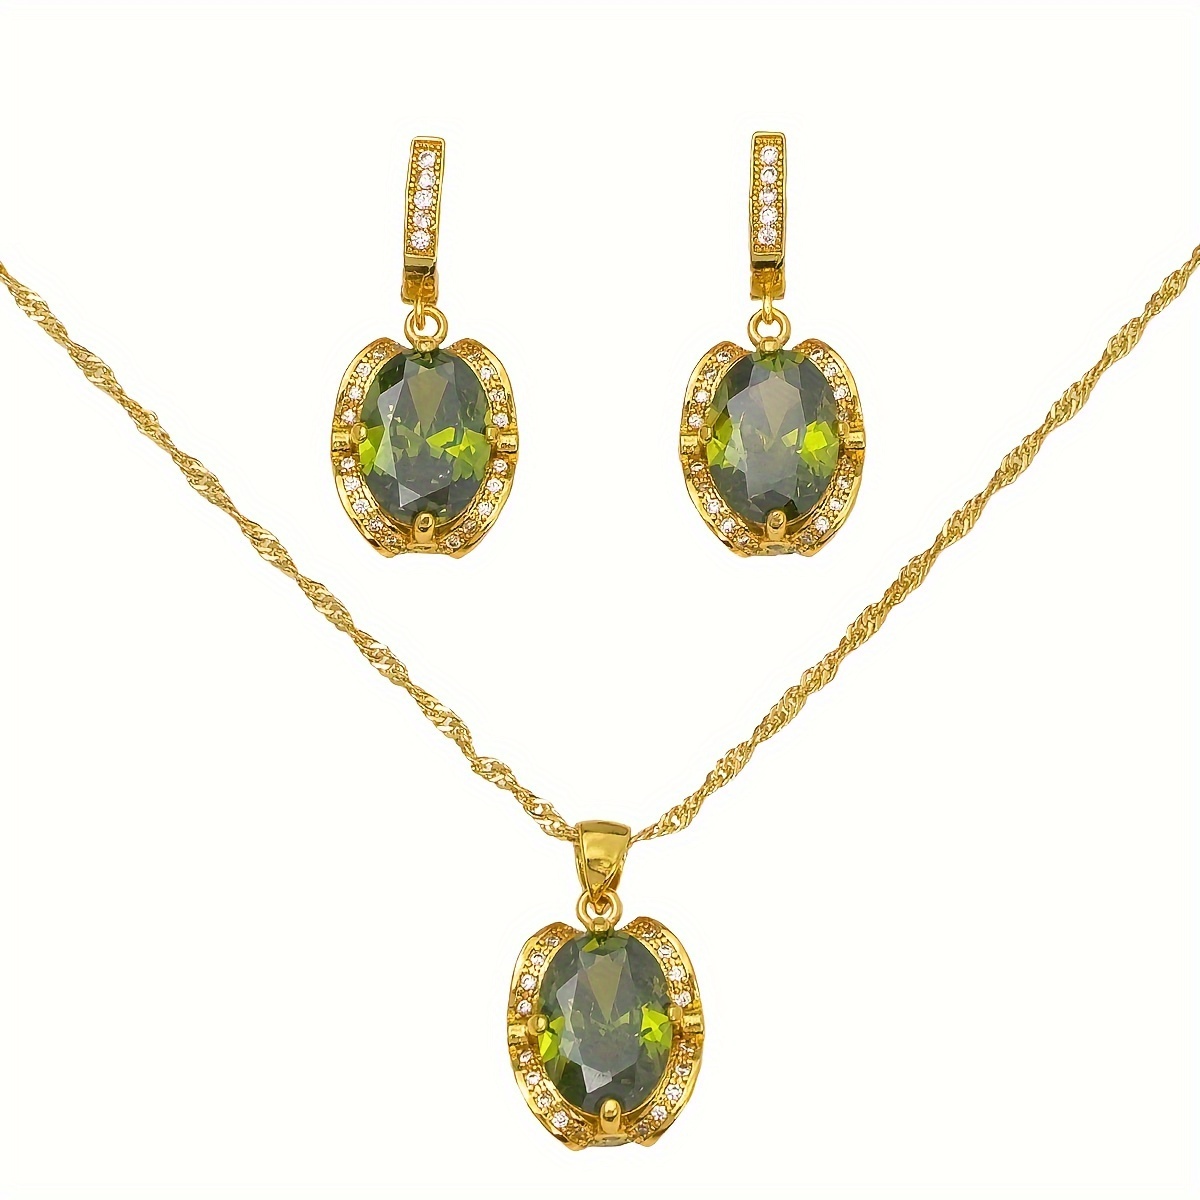 

3pcs Elegant And Sparkling Geometric Cubic Zirconia Necklace And Earrings Set In Retro Olive Green Color - -plated Jewelry Set For Valentine's Day, Weddings, And Girl's Gift